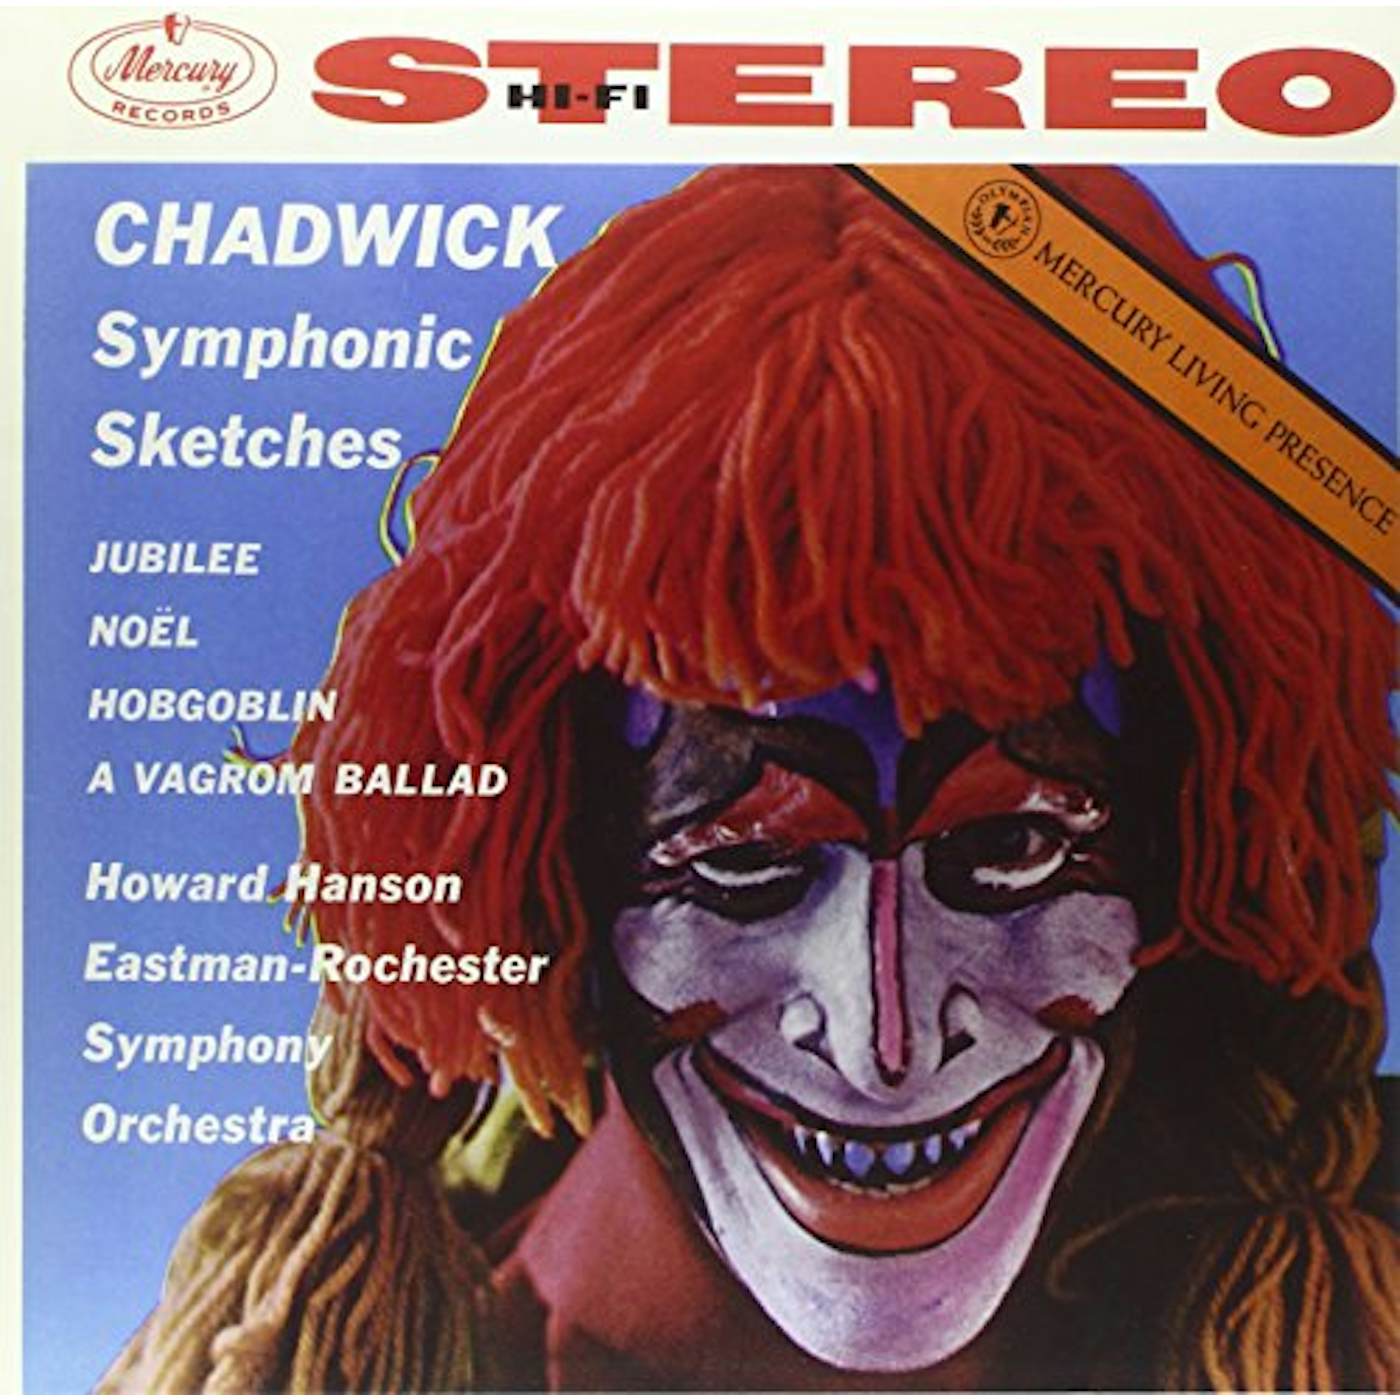 CHADWICK / HANSON / EASTMAN-ROCHESTER ORCHESTRA Symphonic Sketches Vinyl Record